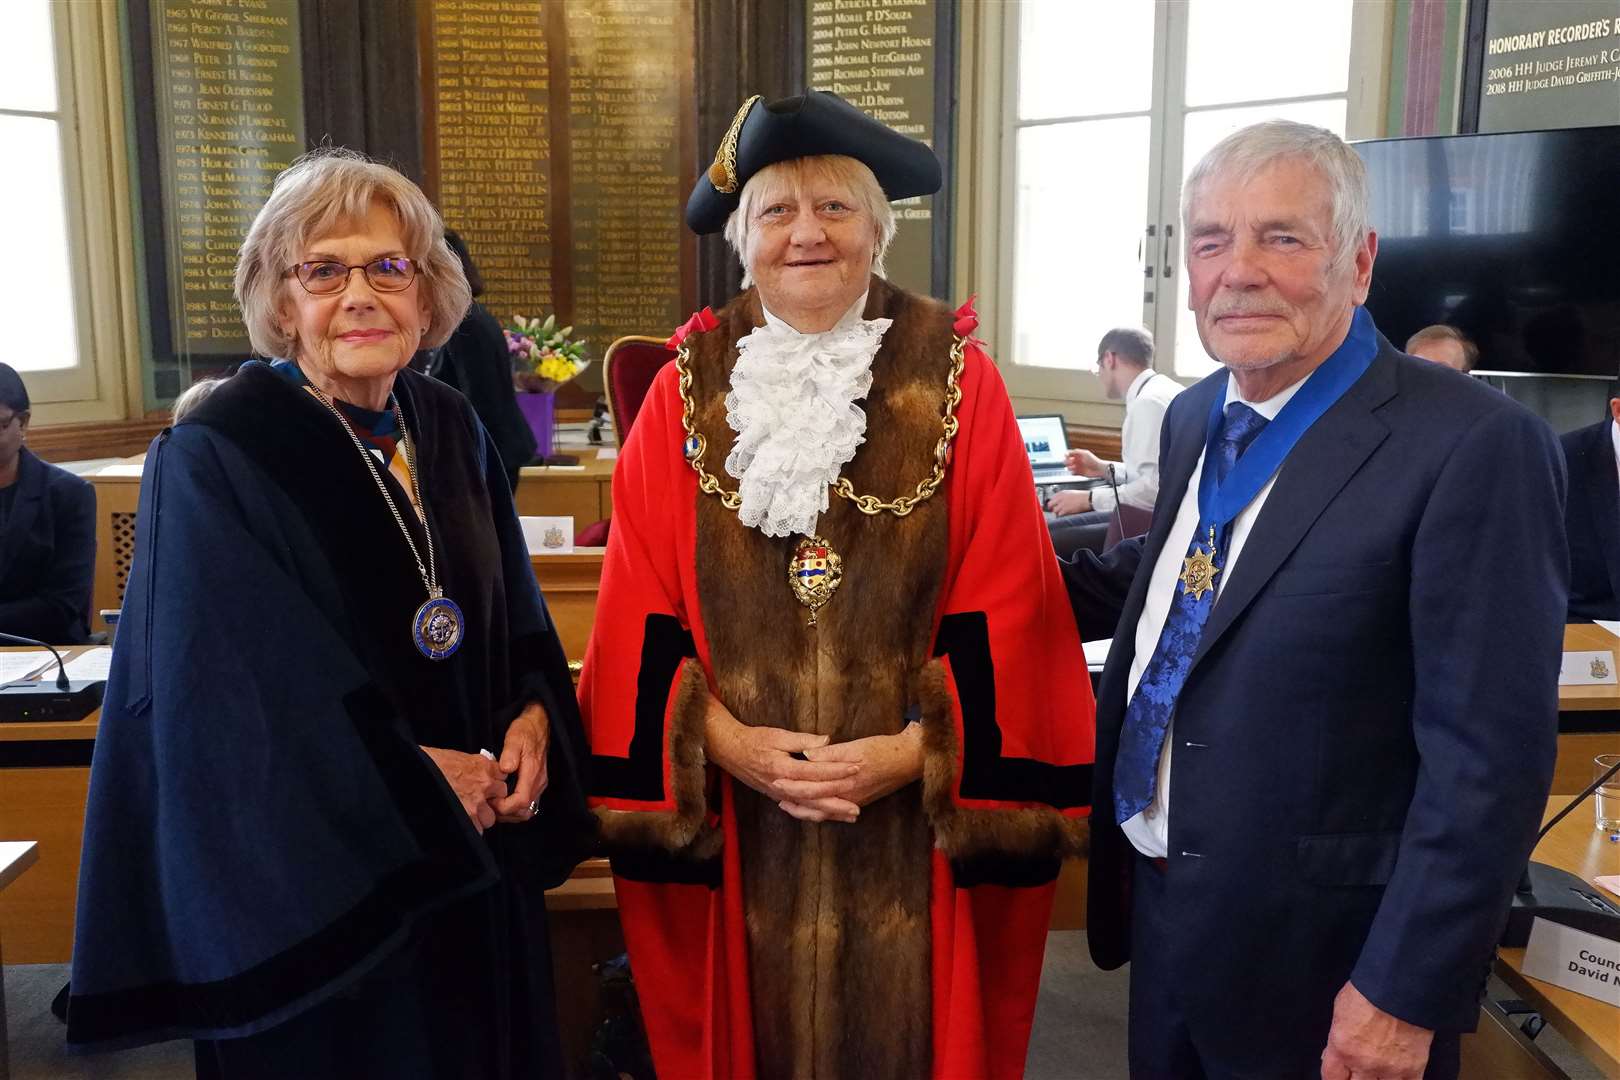 Wendy Hinder. left, and her husband Bob with the Mayor, Cllr Marion Ring